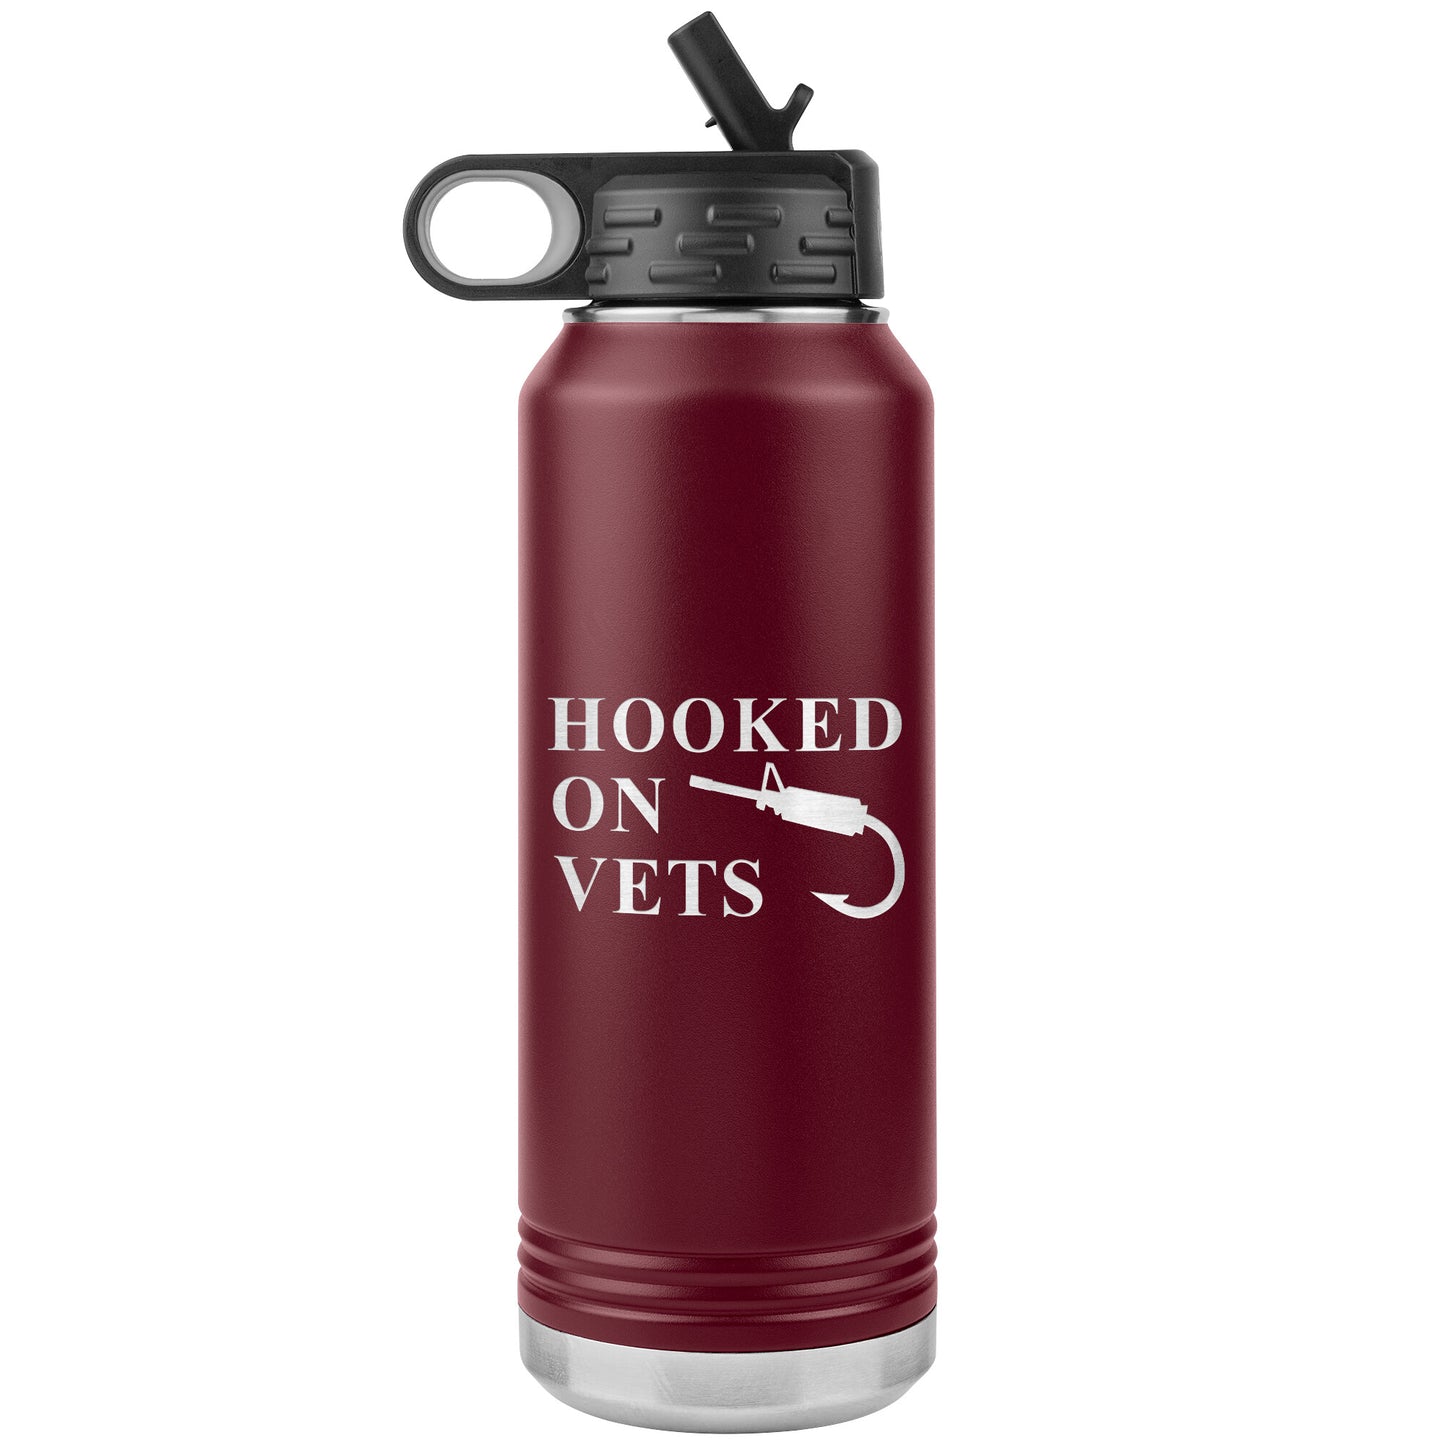 HOOKED ON VETS - 32oz Insulated Water Bottle